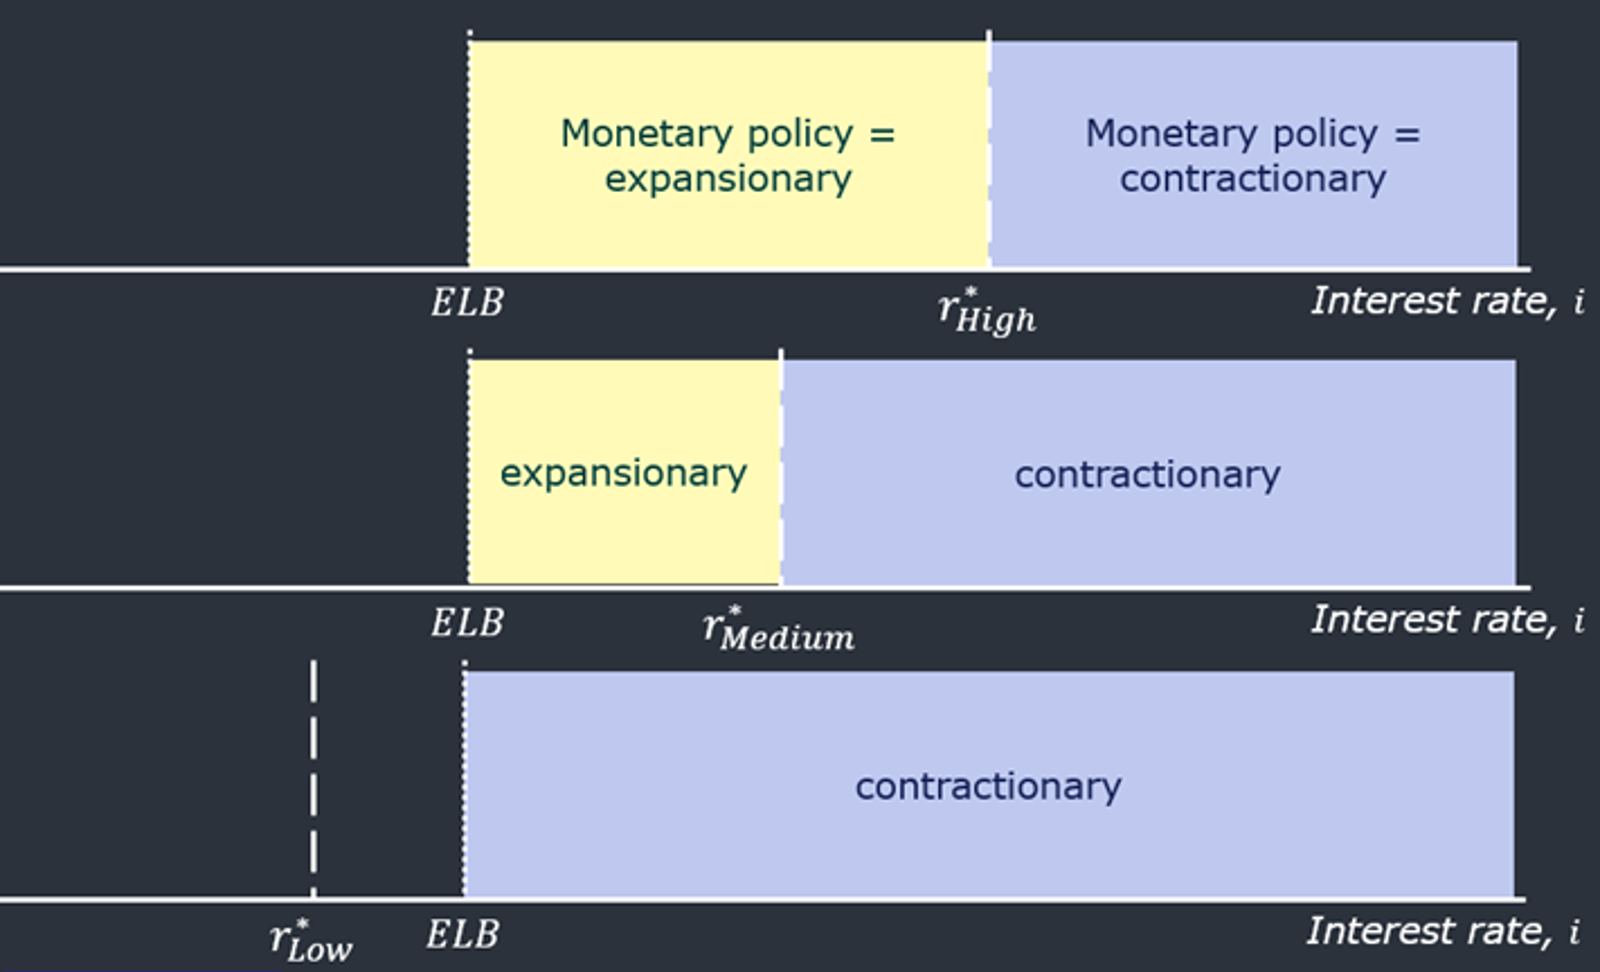 Figure 2. The effective lower bound limits the scope for monetary stimulus